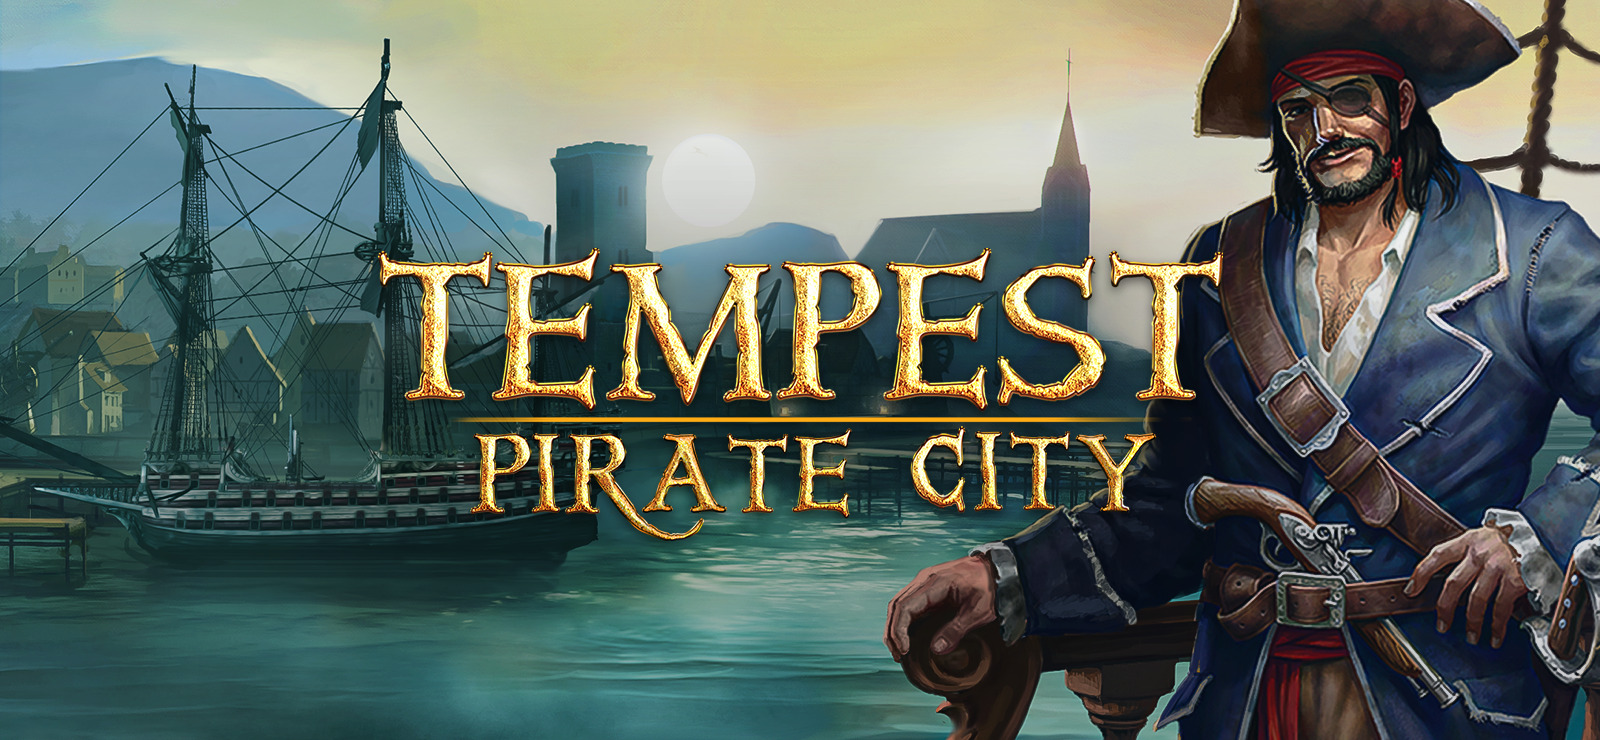 Tempest Pirate City Free Download